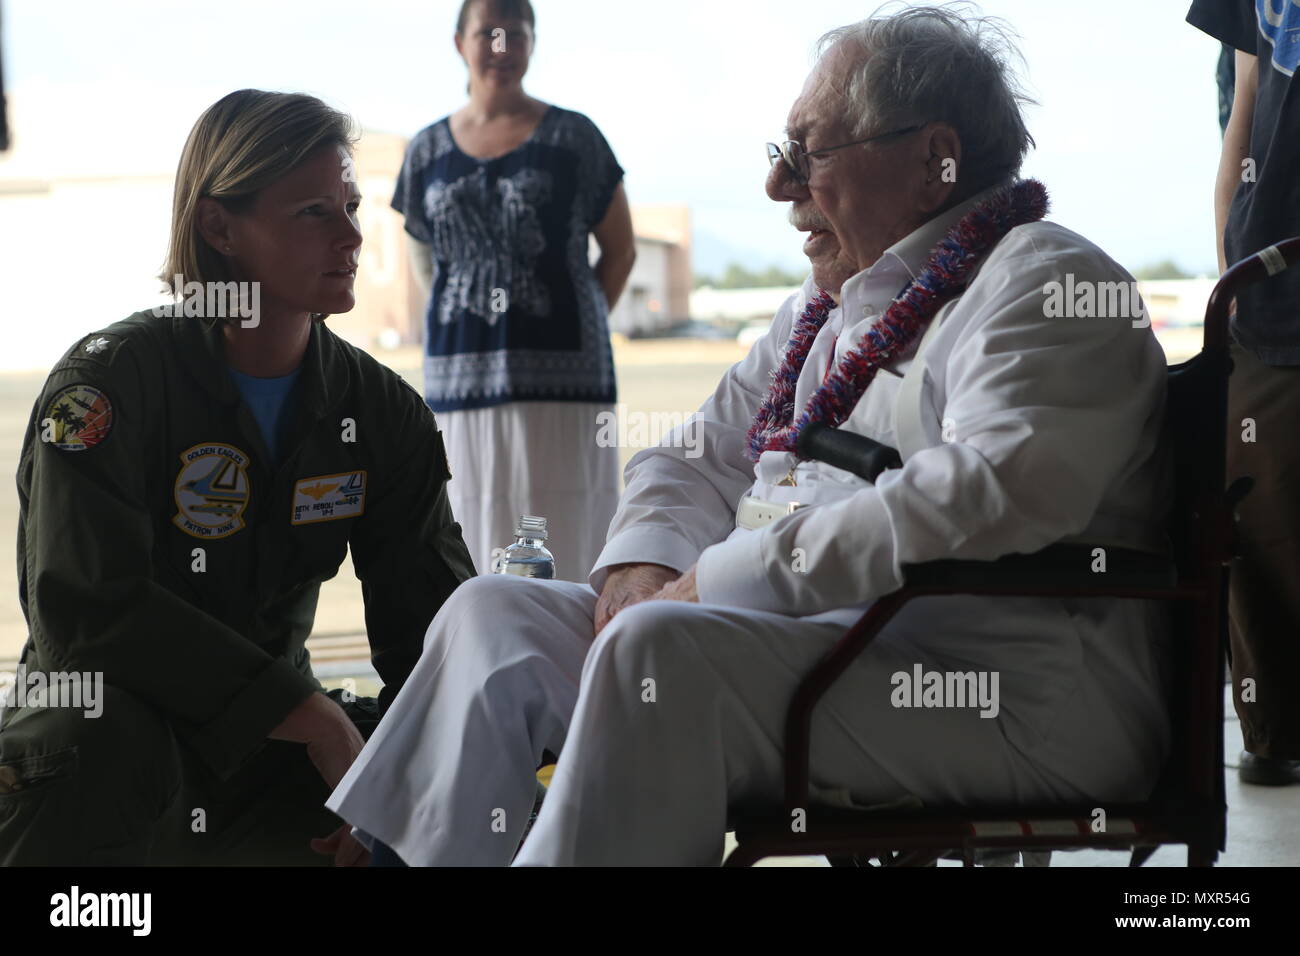 Melvin Heckman, a Pearl Harbor survivor, speaks with Cmdr. Beth Regoli, the commanding officer of Patrol Squadron 9, about his experiences during the attack on Pearl Harbor at Hangar 104 aboard Marine Corps Base Hawaii, December 2, 2016. Heckman is known for rescuing sailors from the USS Arizona during the attack on Pearl Harbor after the ship was attacked by Japanese Zeros. 'I reached out to grab a man's hand to help him up and take him to the island,' said Heckman, a Sheridan, Wyoming, native. 'I got him out of the water and saw that everything below his belly button was missing; he died in  Stock Photo